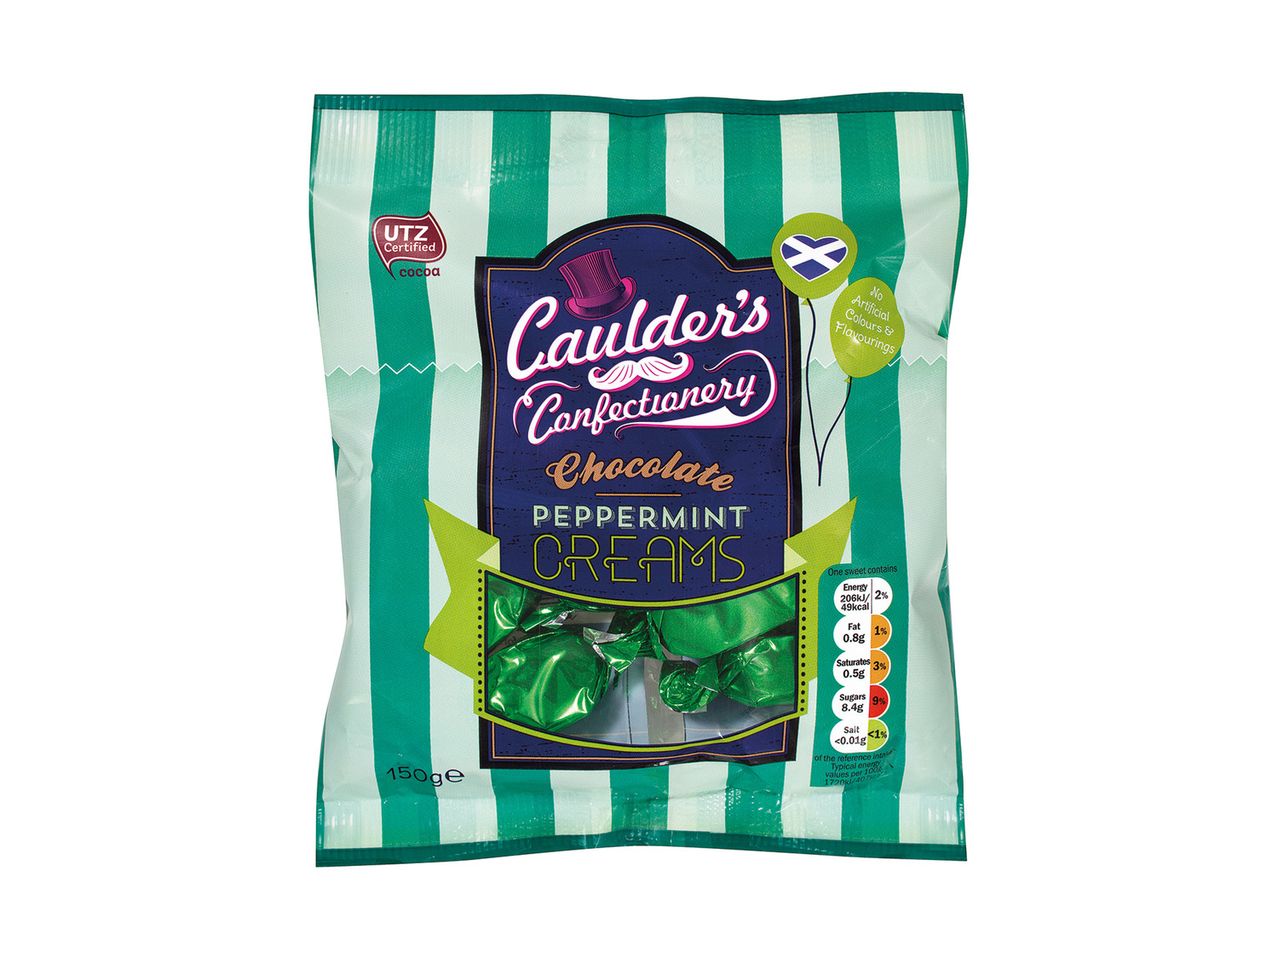 Go to full screen view: Caulder's Confectionery Chocolate Caramels/Peppermint - Image 1